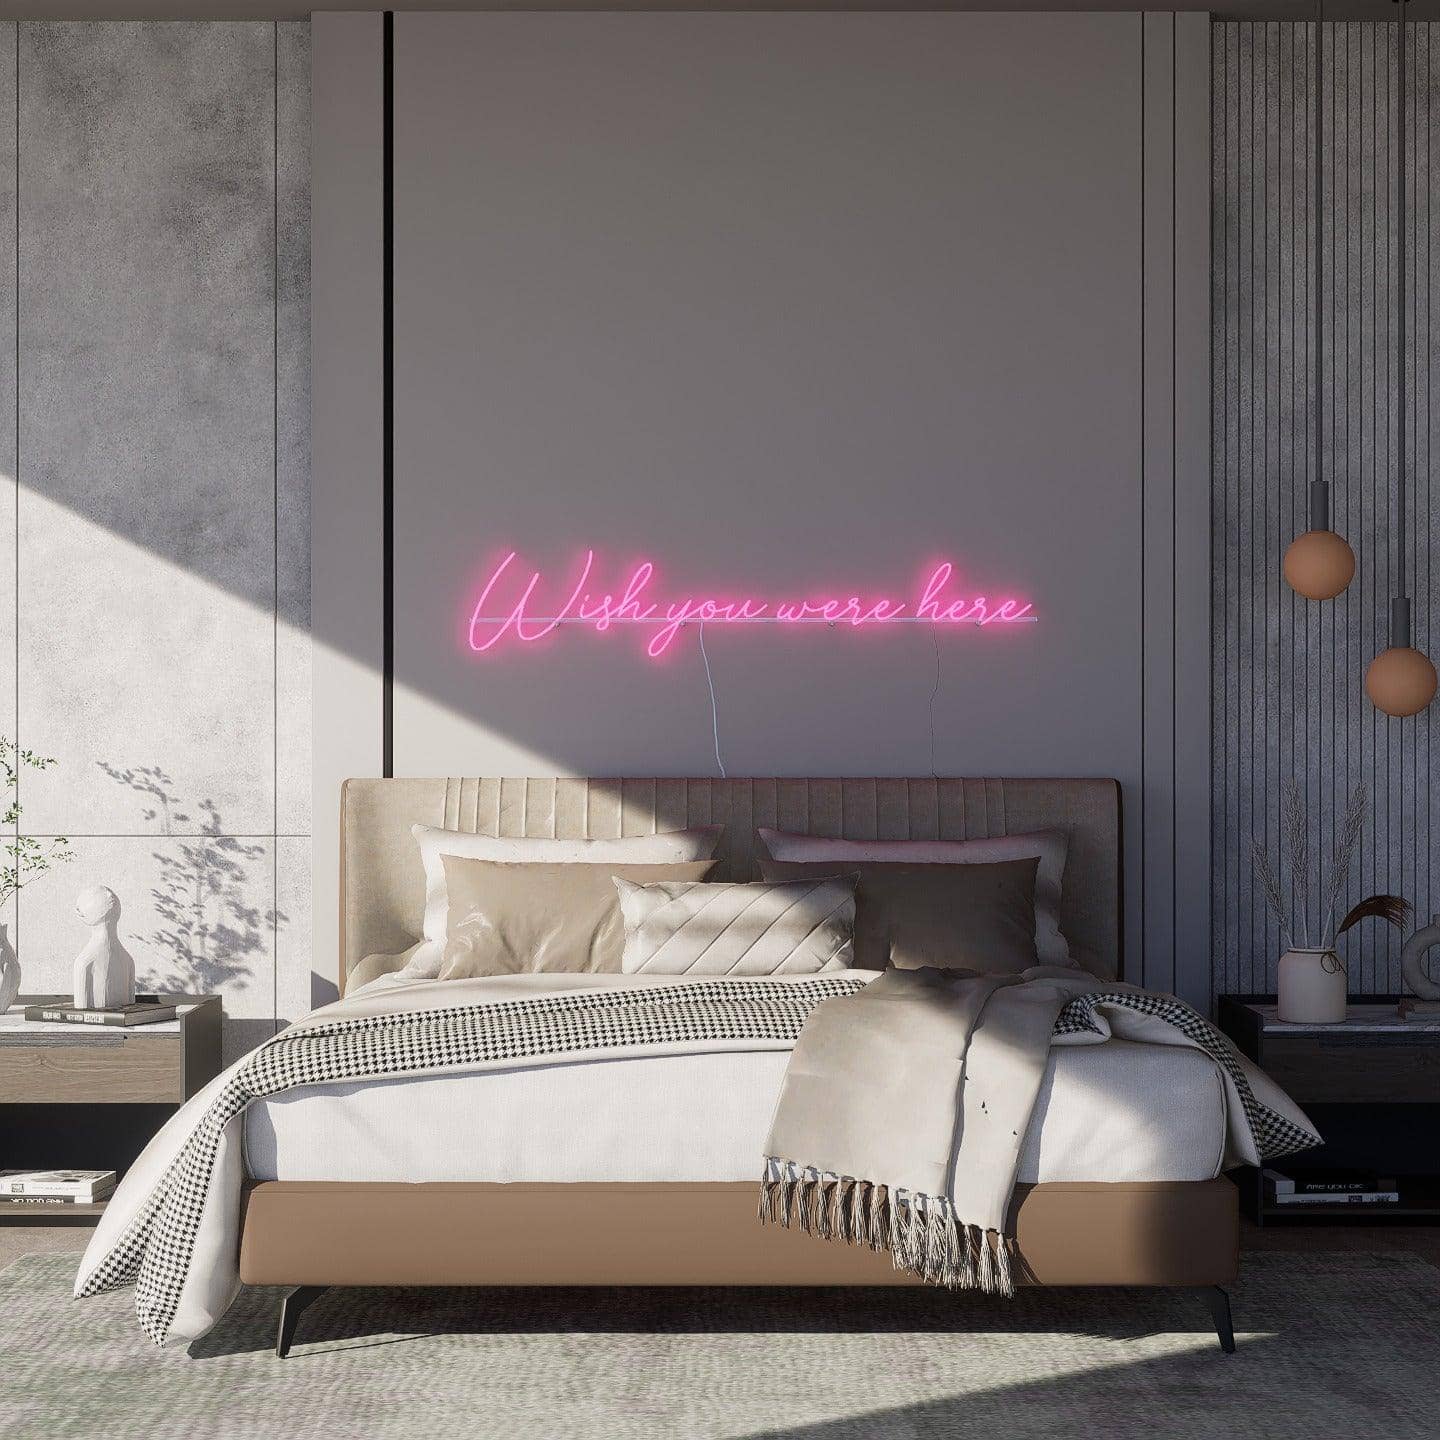 light-up-pink-neon-lights-hanging-on-the-wall-during-the-day-wish-you-were-here